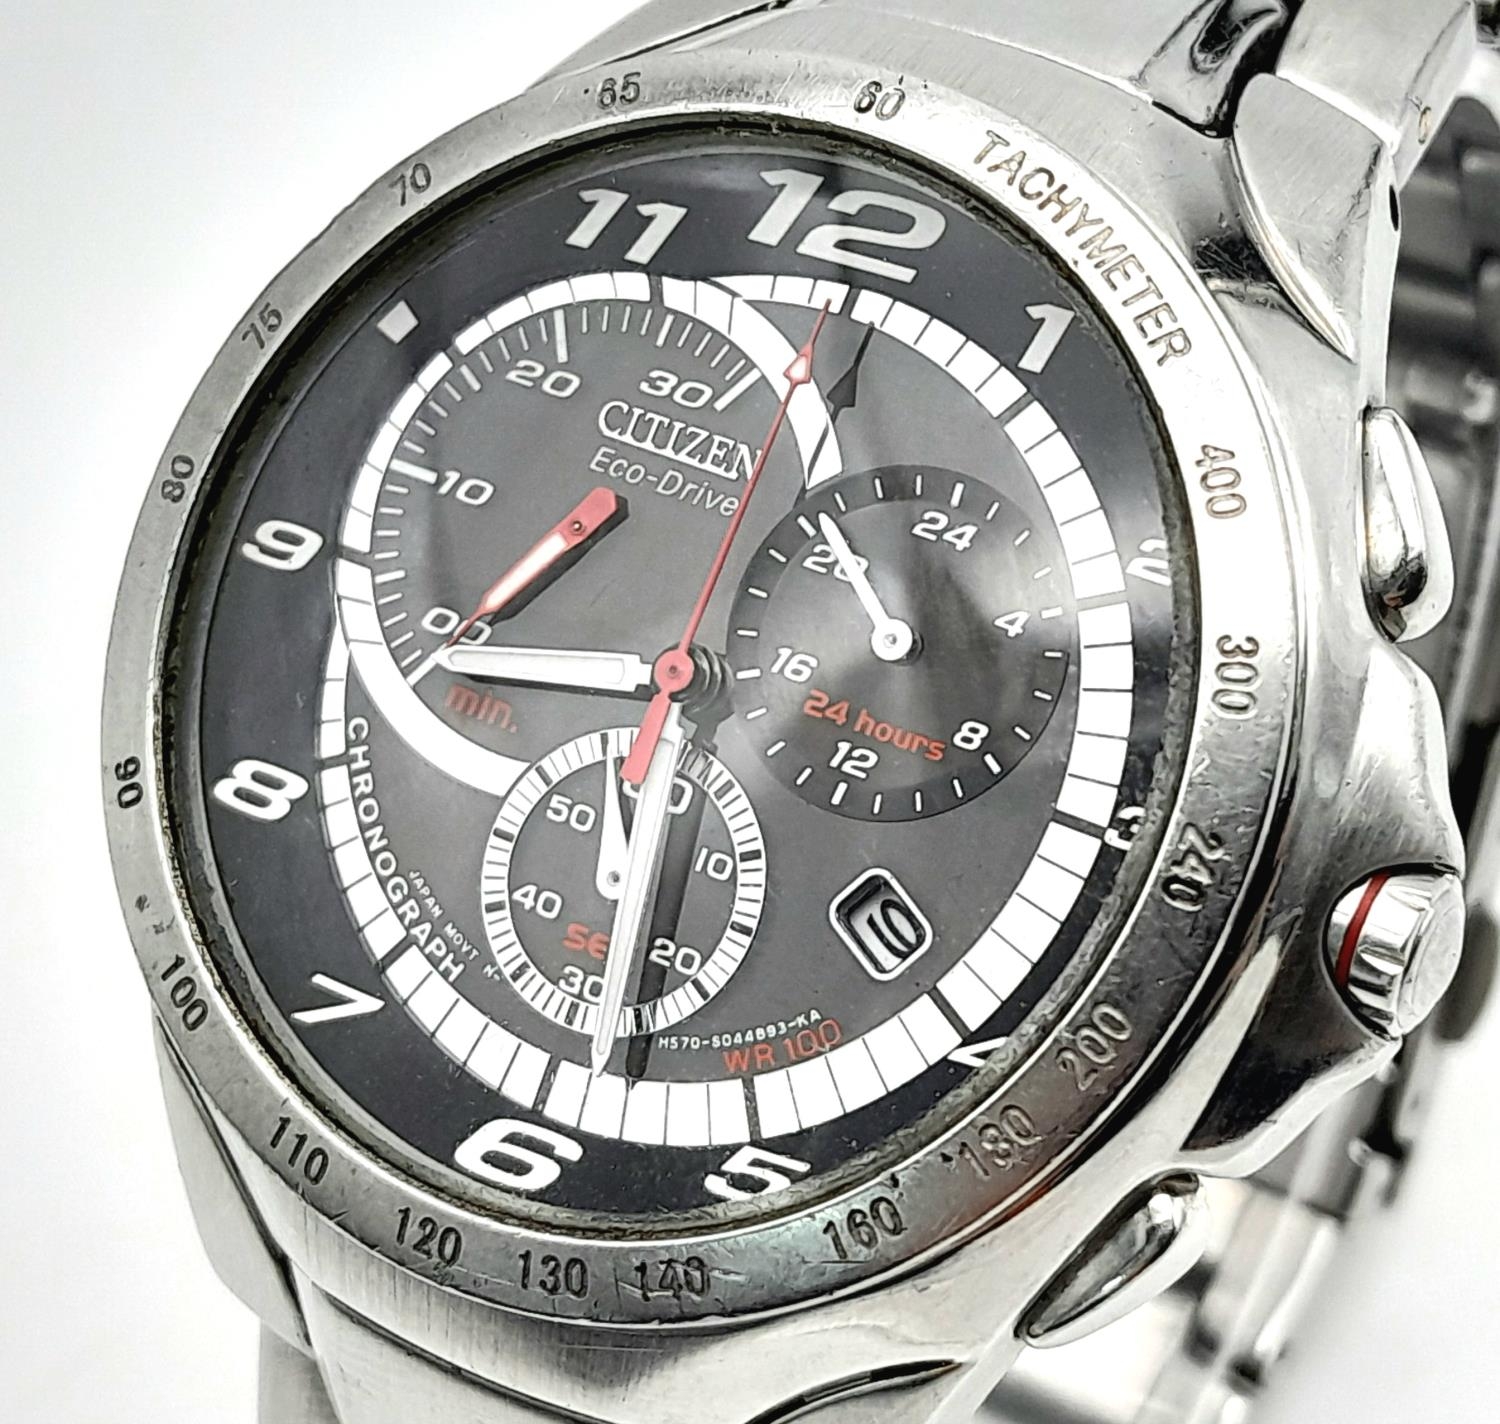 A Citizen Eco Drive Chronograph Gents Watch. Stainless steel bracelet and case - 42mm. Black dial - Image 2 of 6